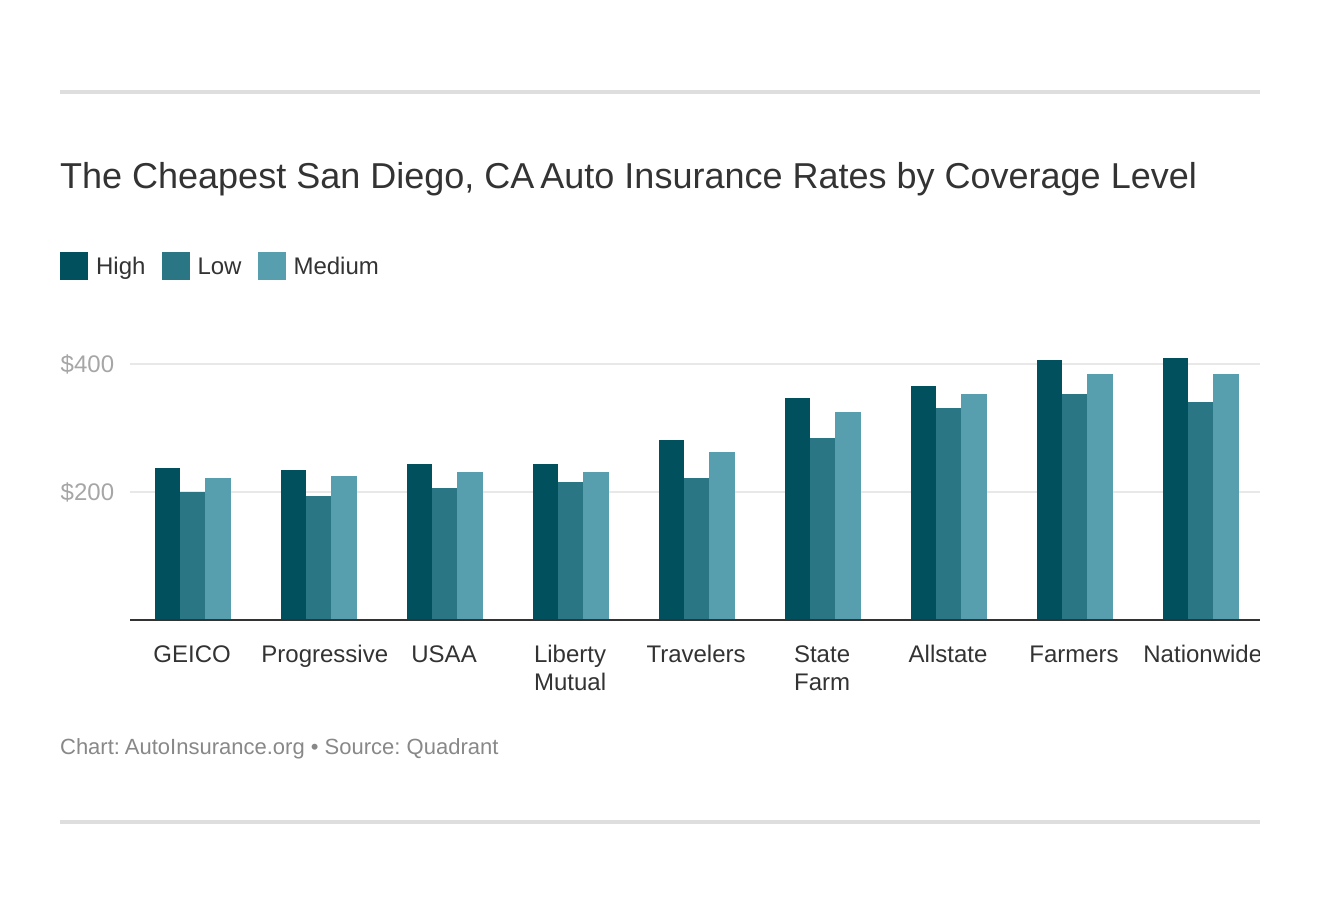 The Cheapest San Diego, CA Auto Insurance Rates by Coverage Level